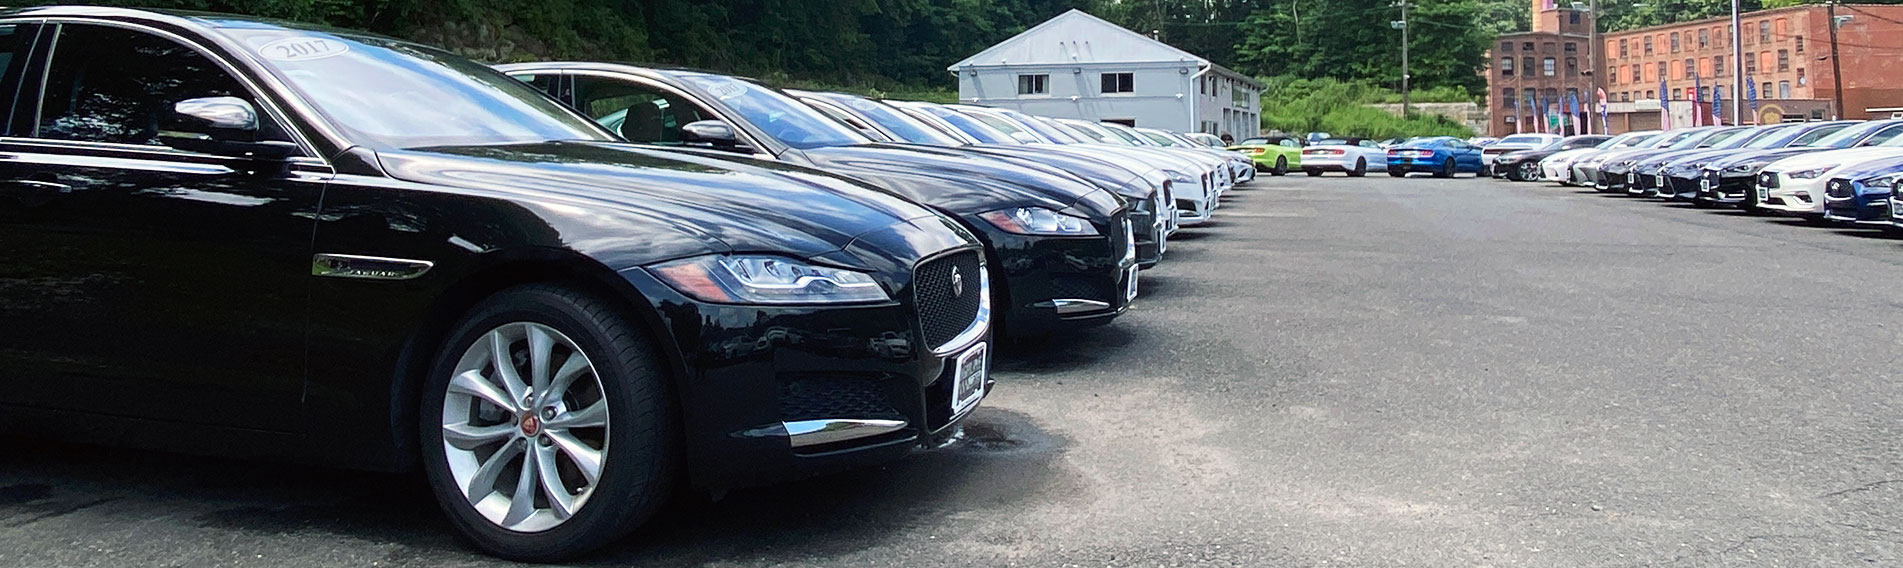 Used cars for sale in Waterbury | Highline Car Connection. Waterbury CT